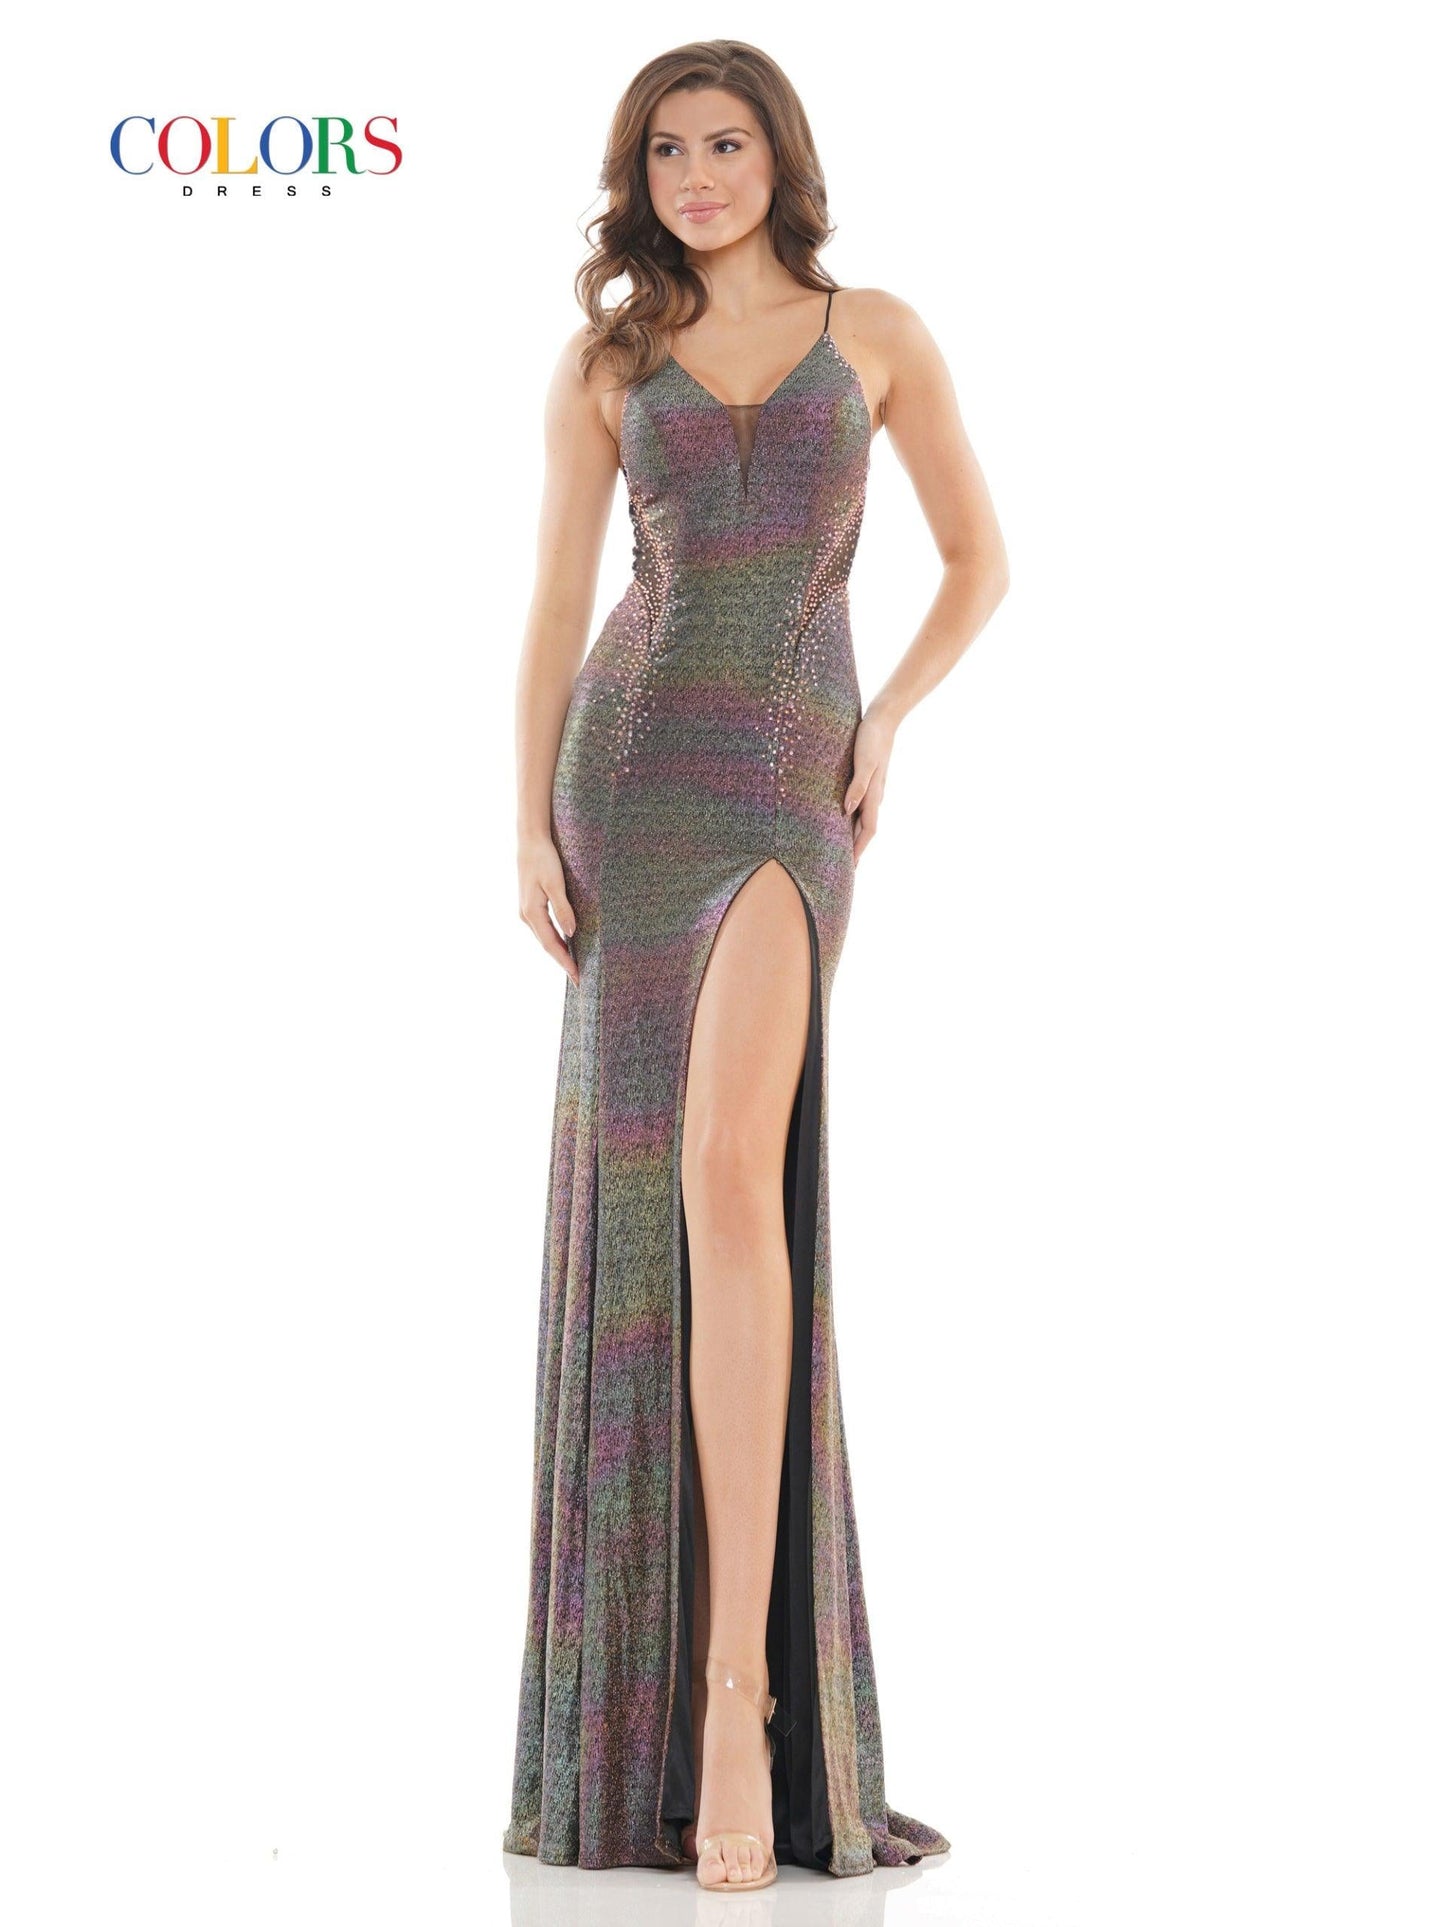 Colors Long Spaghetti Strap Metallic Prom Gown 2669 - The Dress Outlet